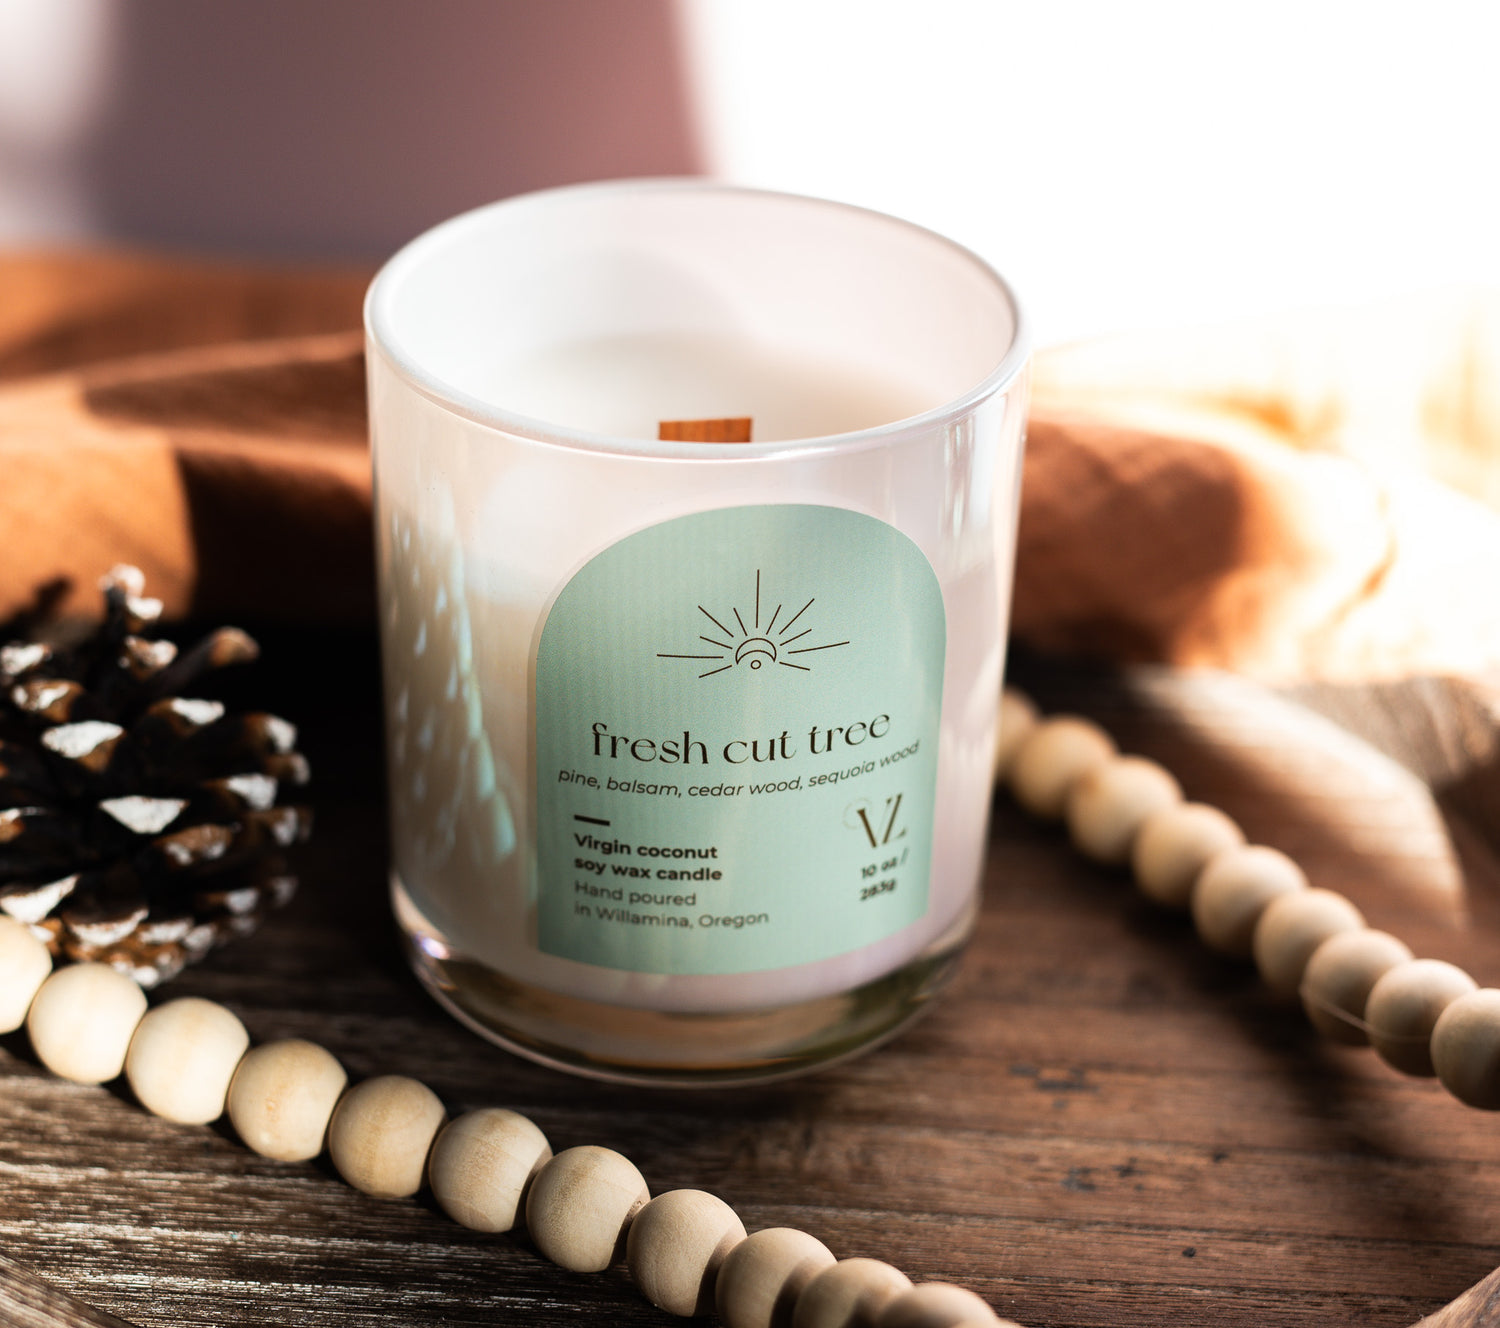 Fresh Cut Tree coconut soy wax candle | pine, balsam, cedar wood, sequoia wood - Vincent Land Candle Co.